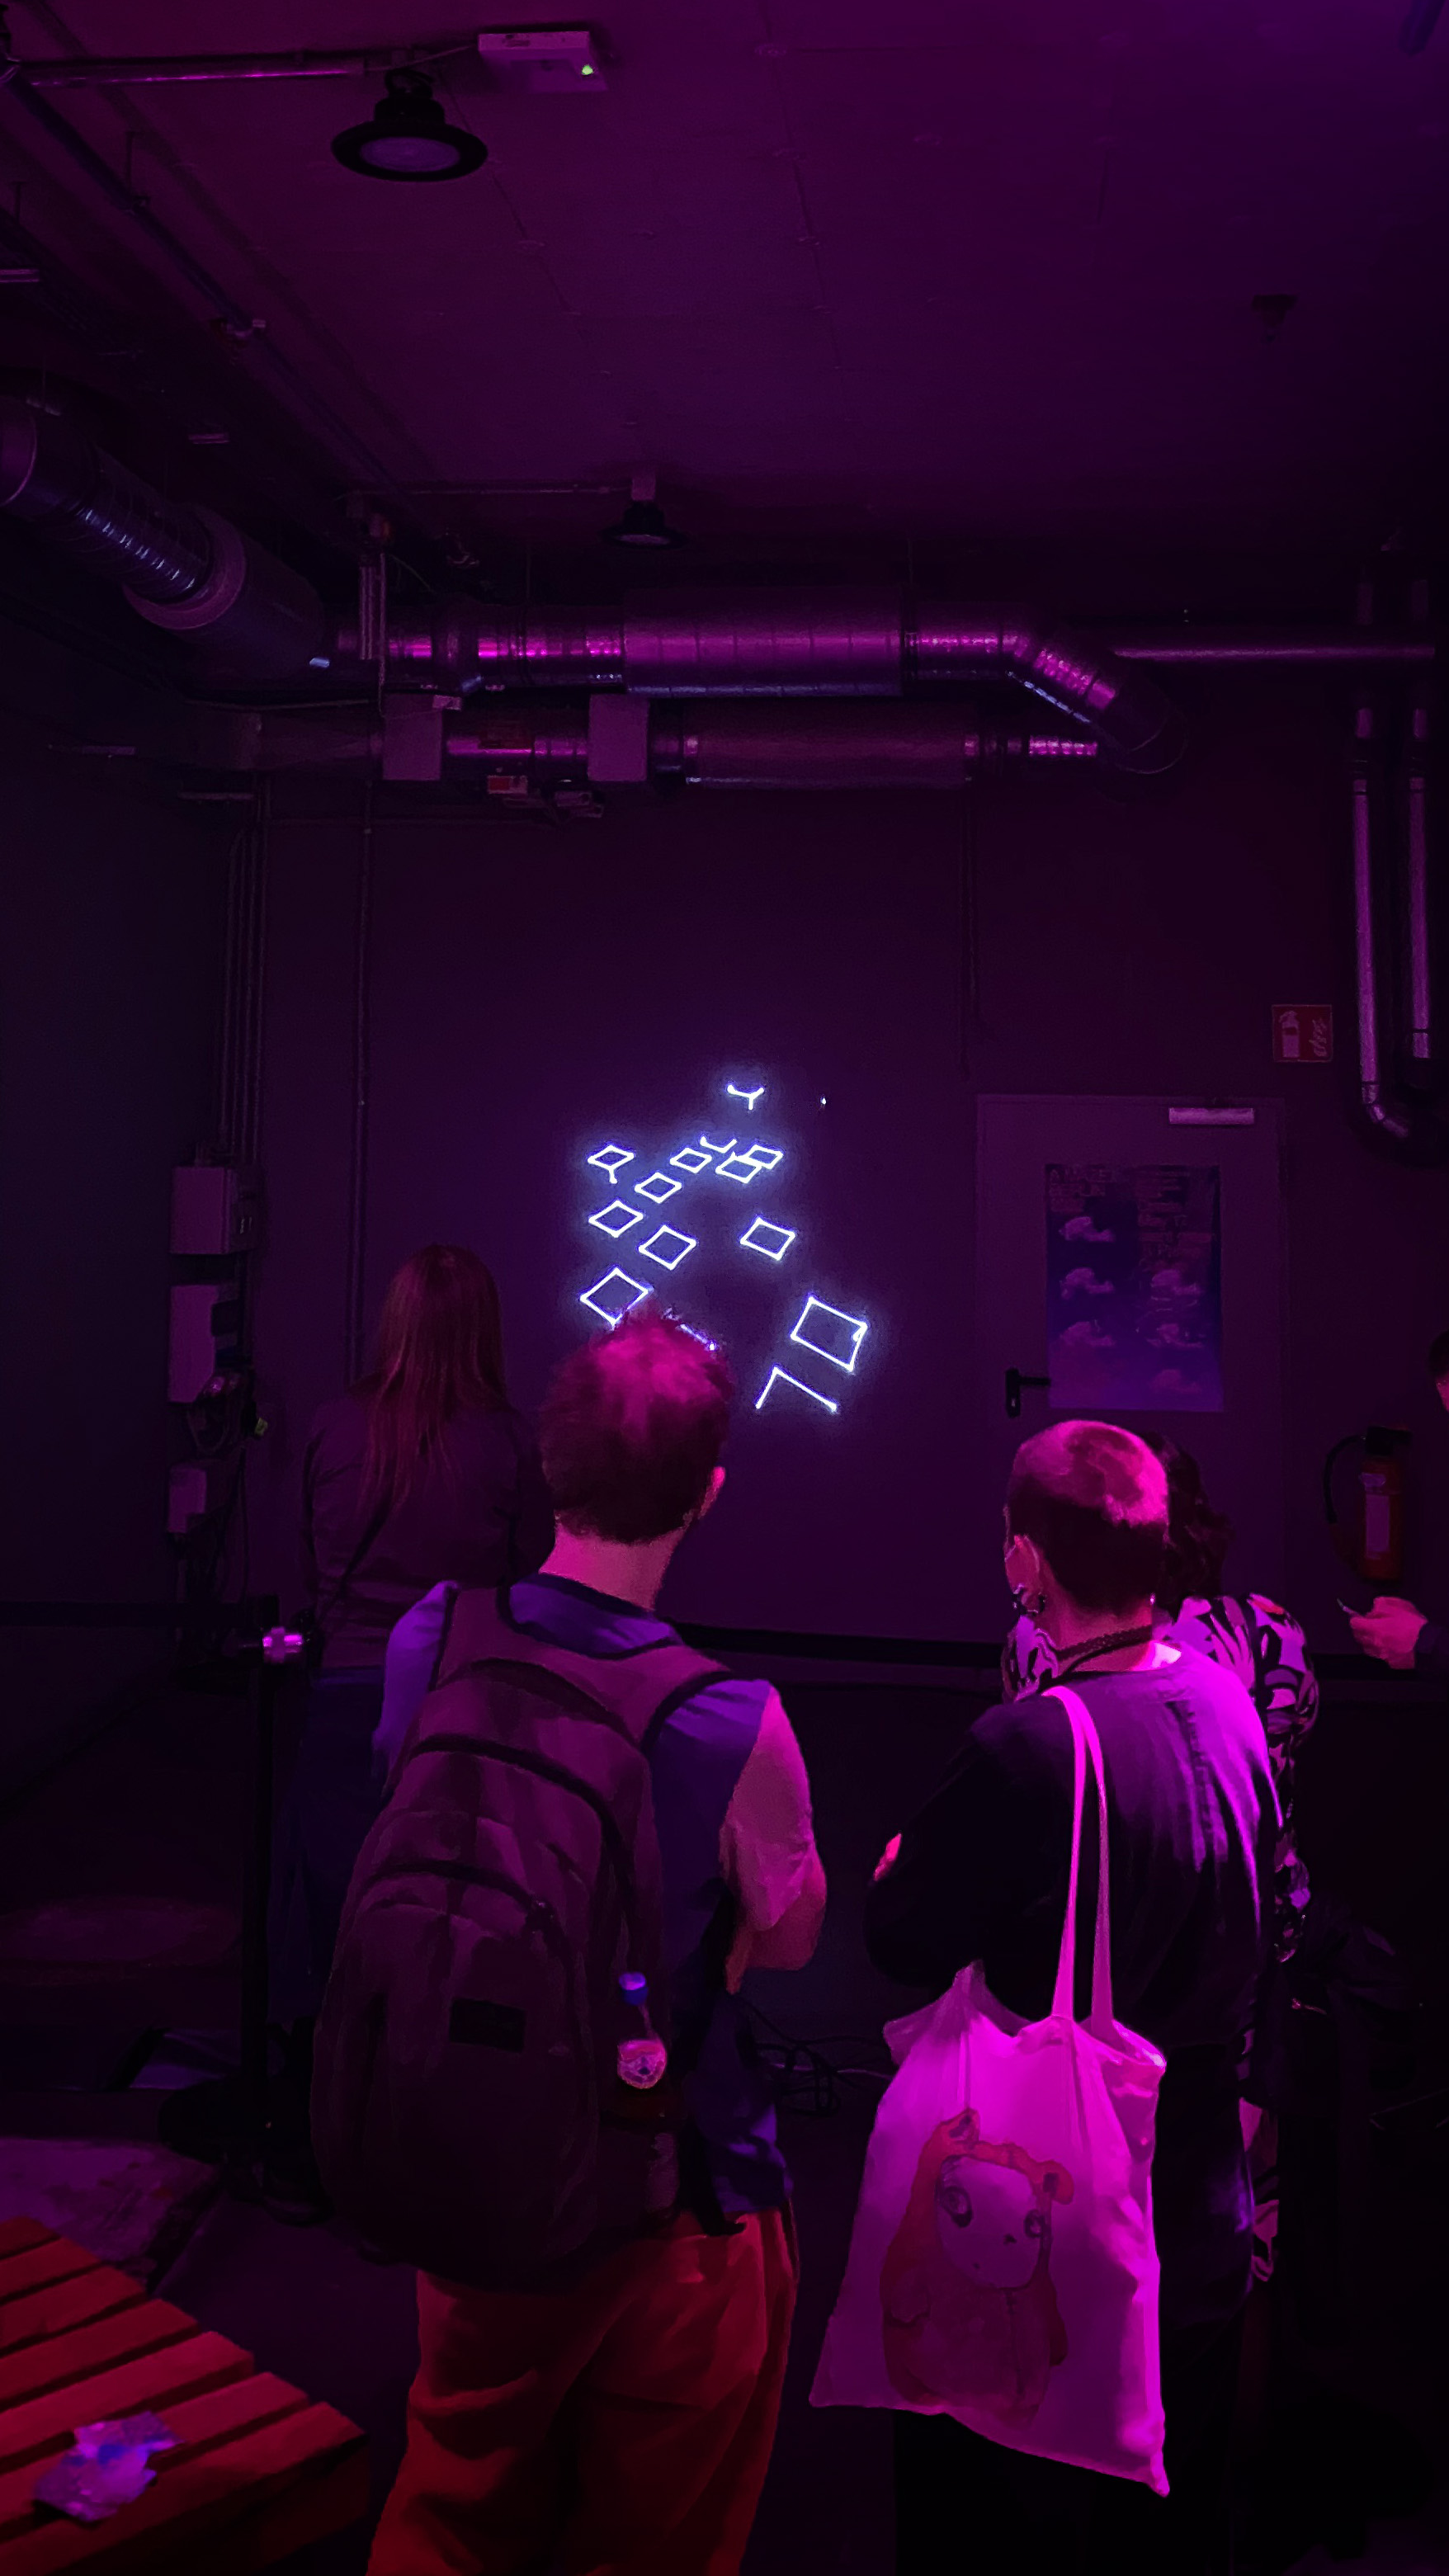 White laser light rhombi projected onto a wall. Purple lit room, people standing in front.